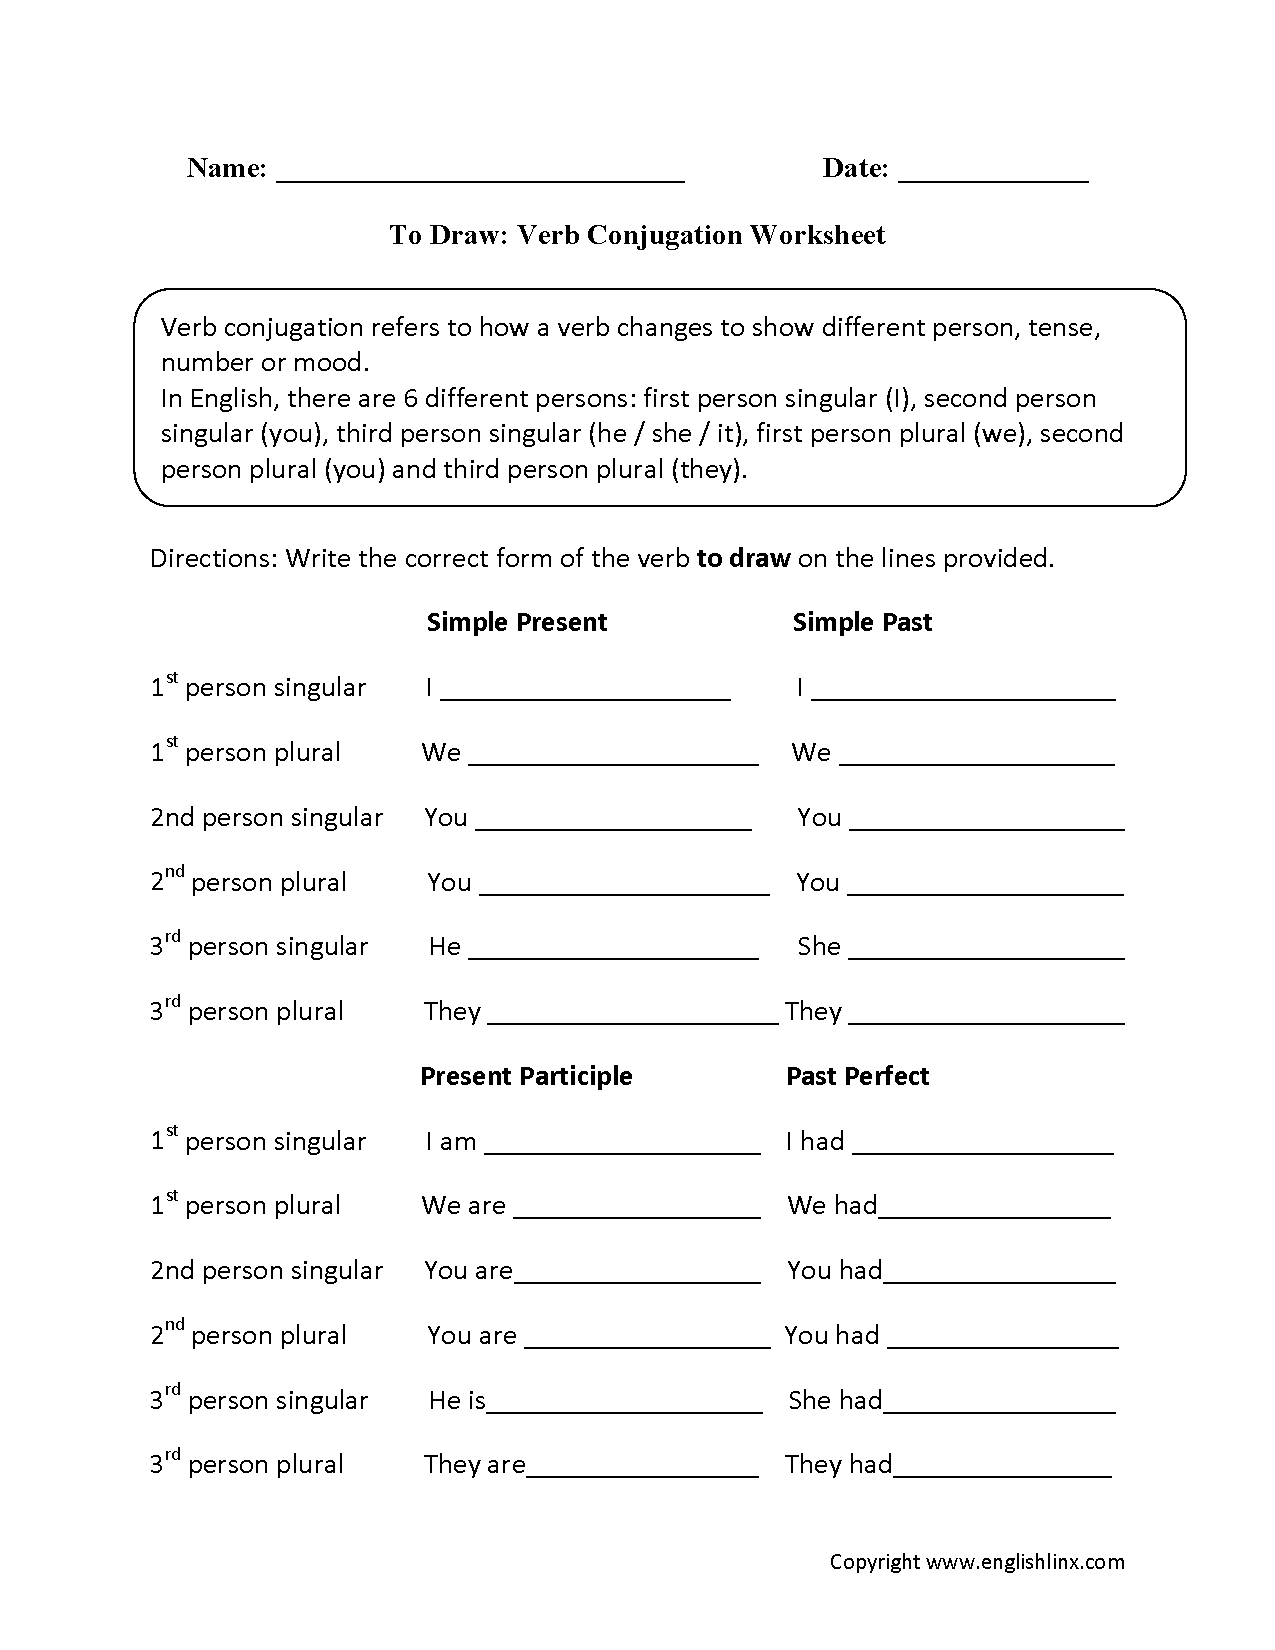 To Draw Verb Conjugation Worksheets